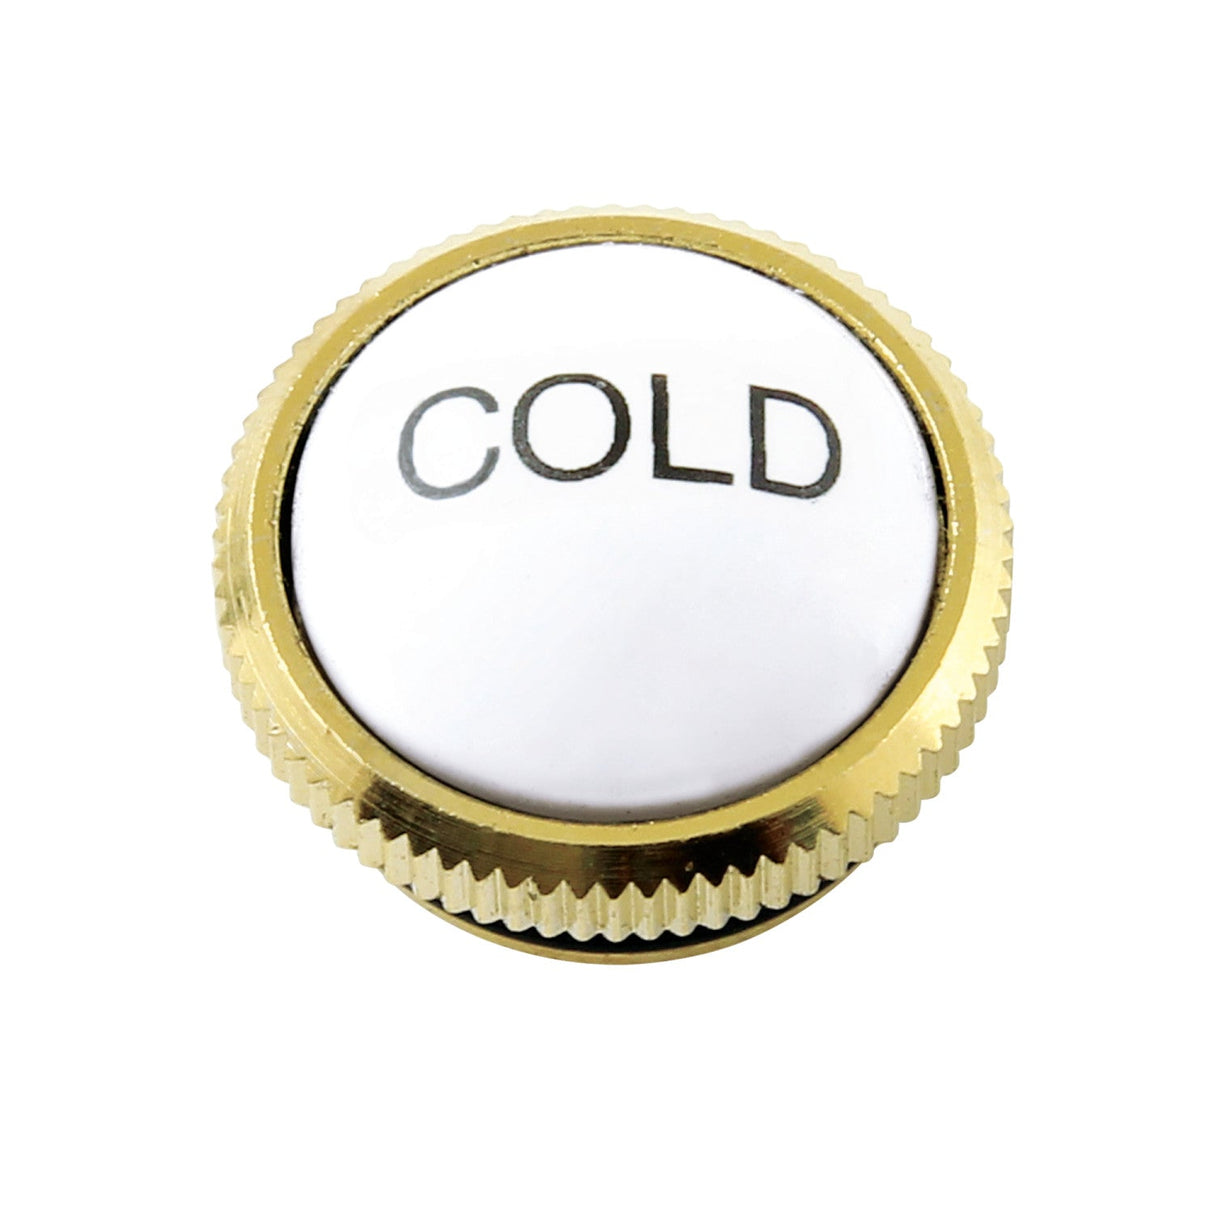 KBHI1792AXC Cold Handle Index Button, Polished Brass